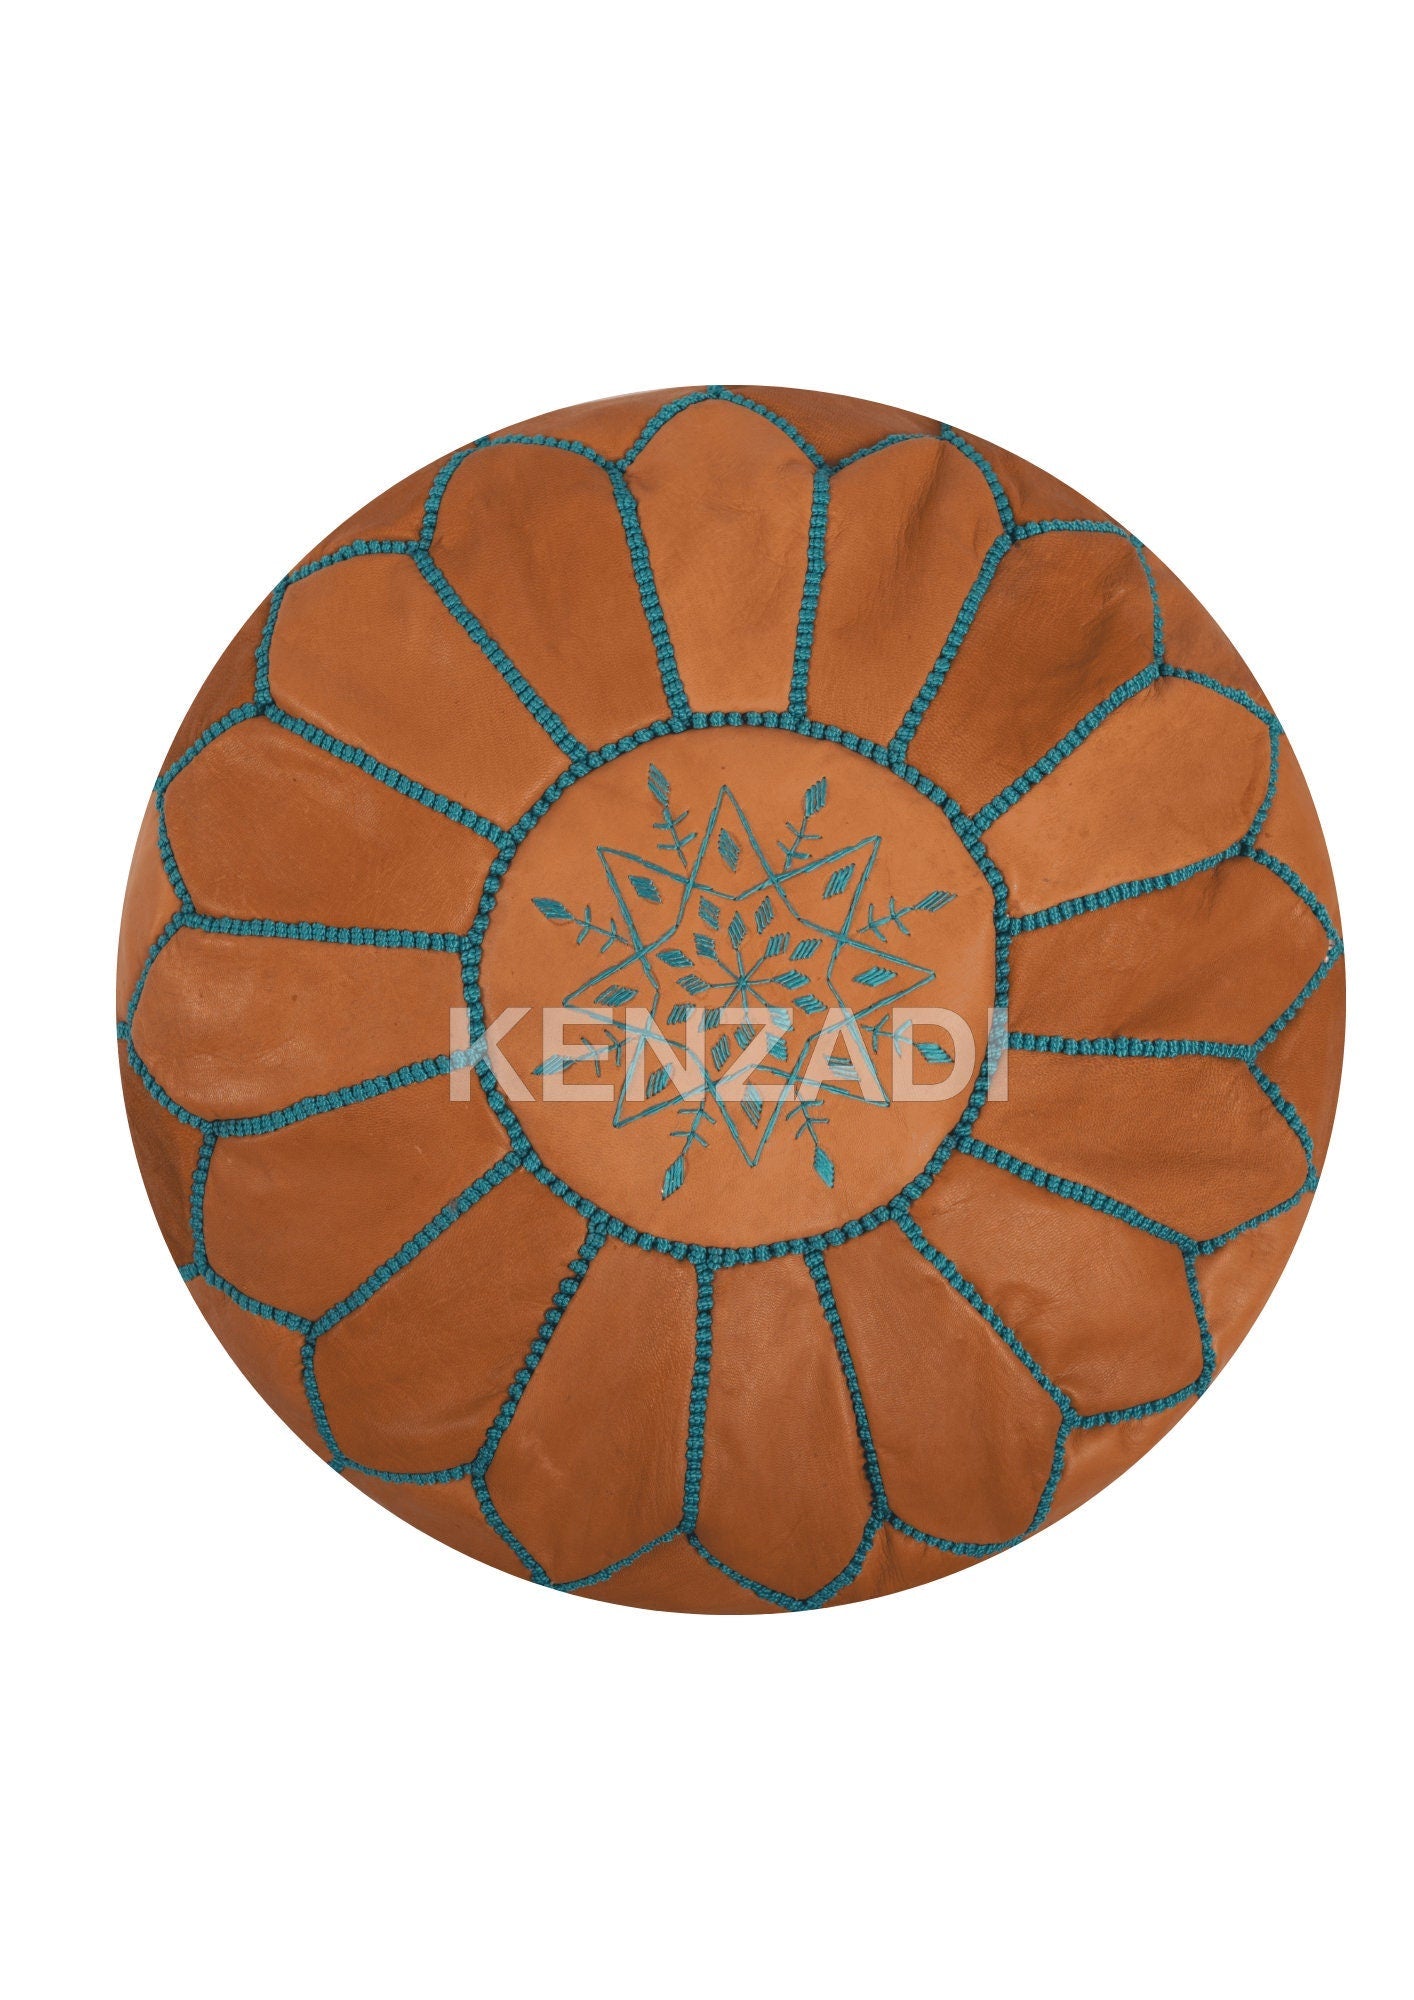 Authentic Moroccan leather pouf with light blue embroidery, perfect for adding a bohemian touch to any room. Made of premium Berber leather, this pouf is perfect for use as a footrest, pouf, or coffee table.